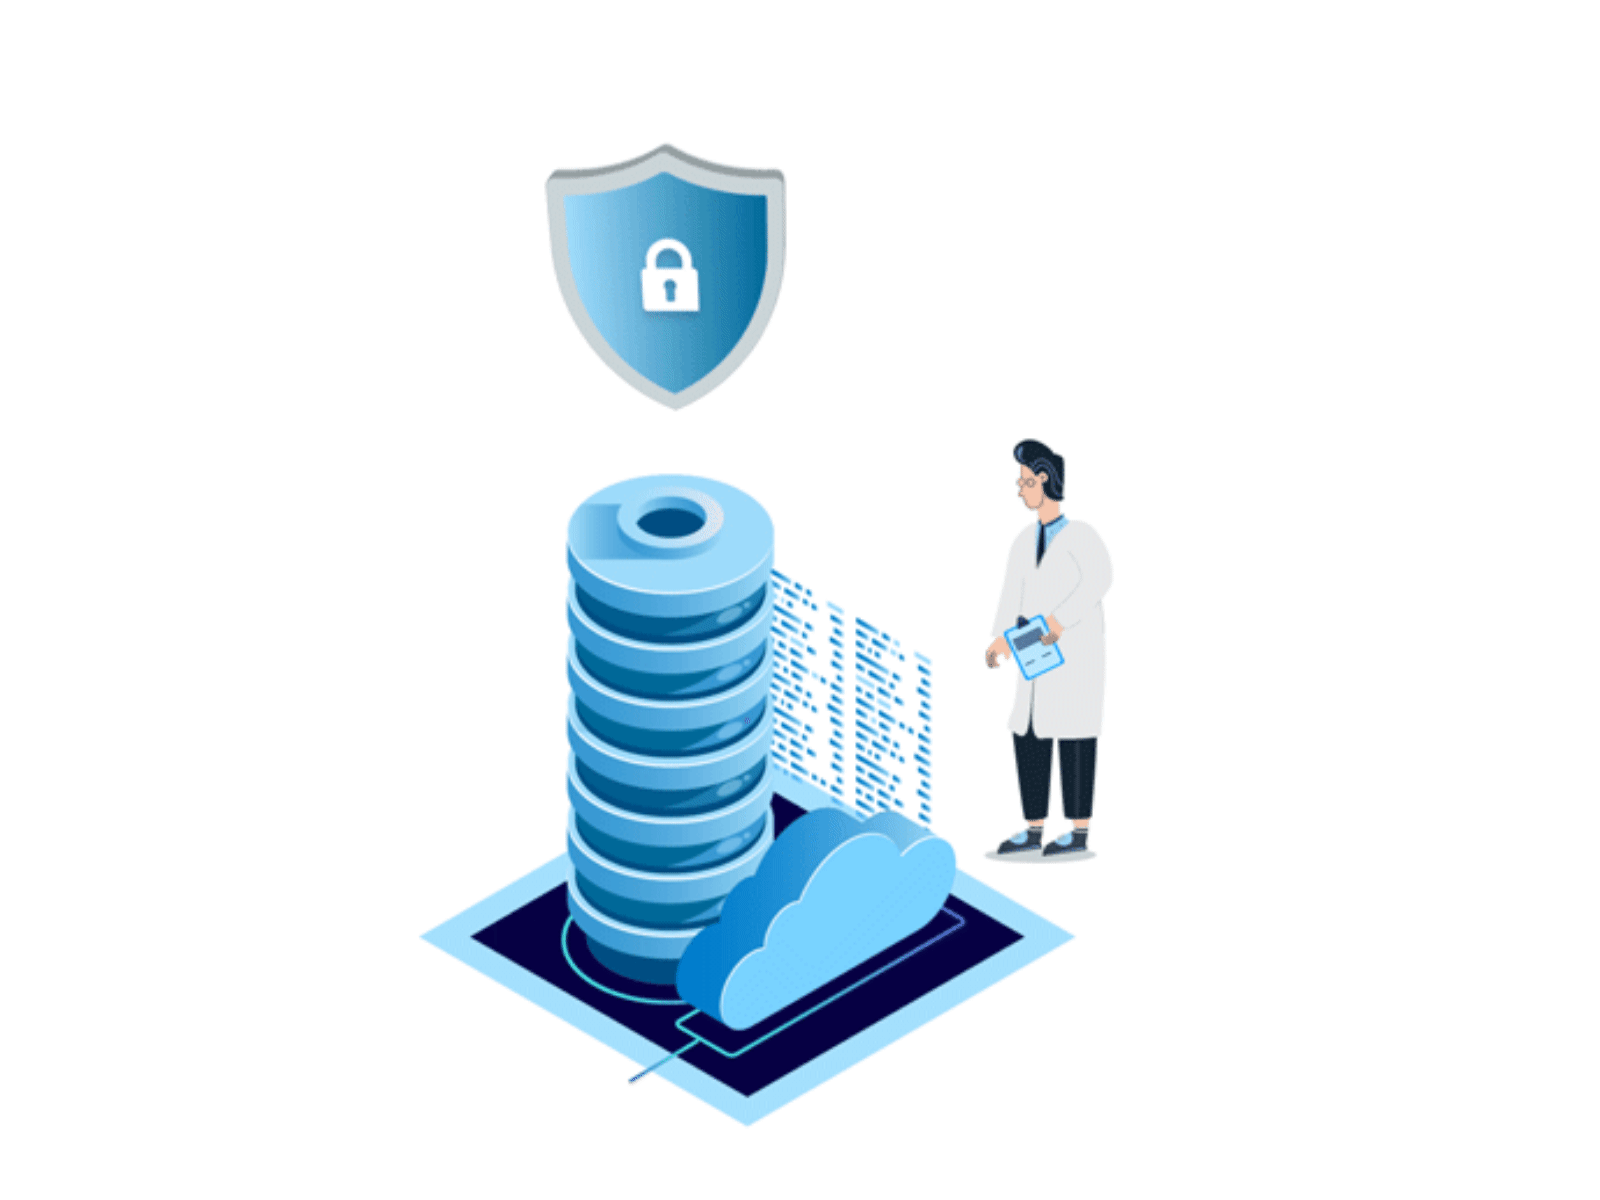 Enterprise-grade Security animation browserstack data graphic illustration security shield